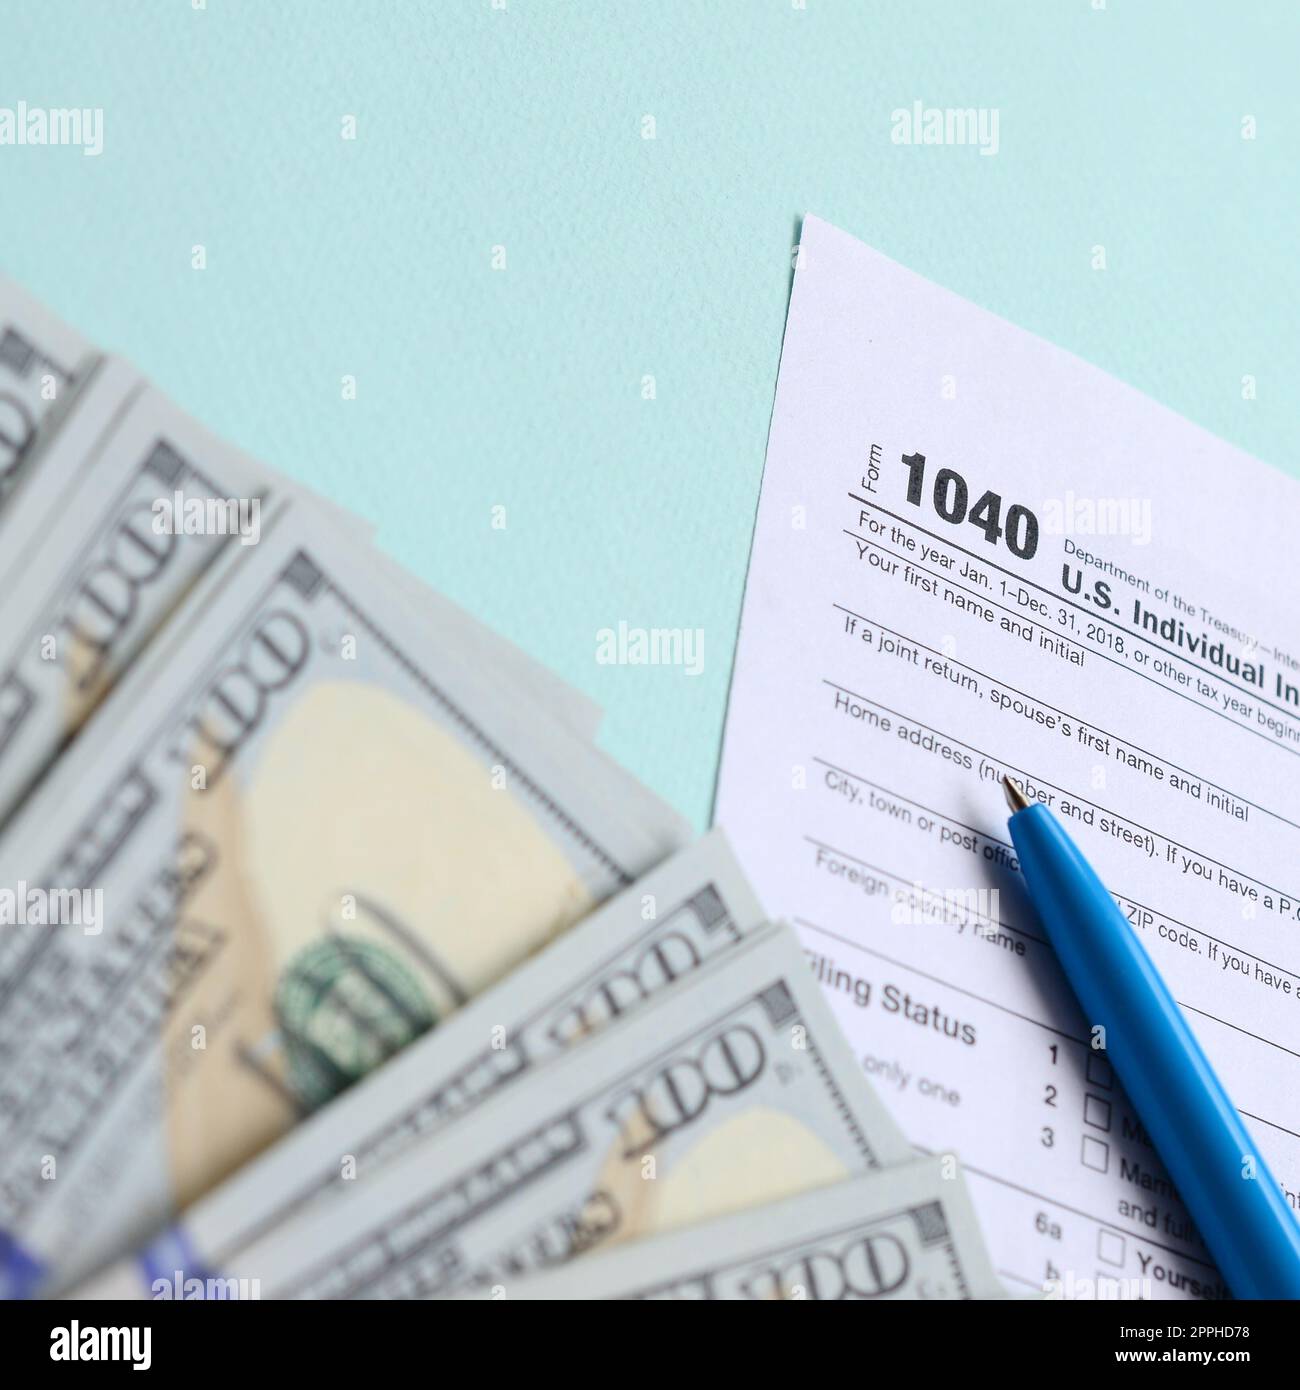 1040 tax form lies near hundred dollar bills and blue pen on a light blue background. US Individual income tax return Stock Photo